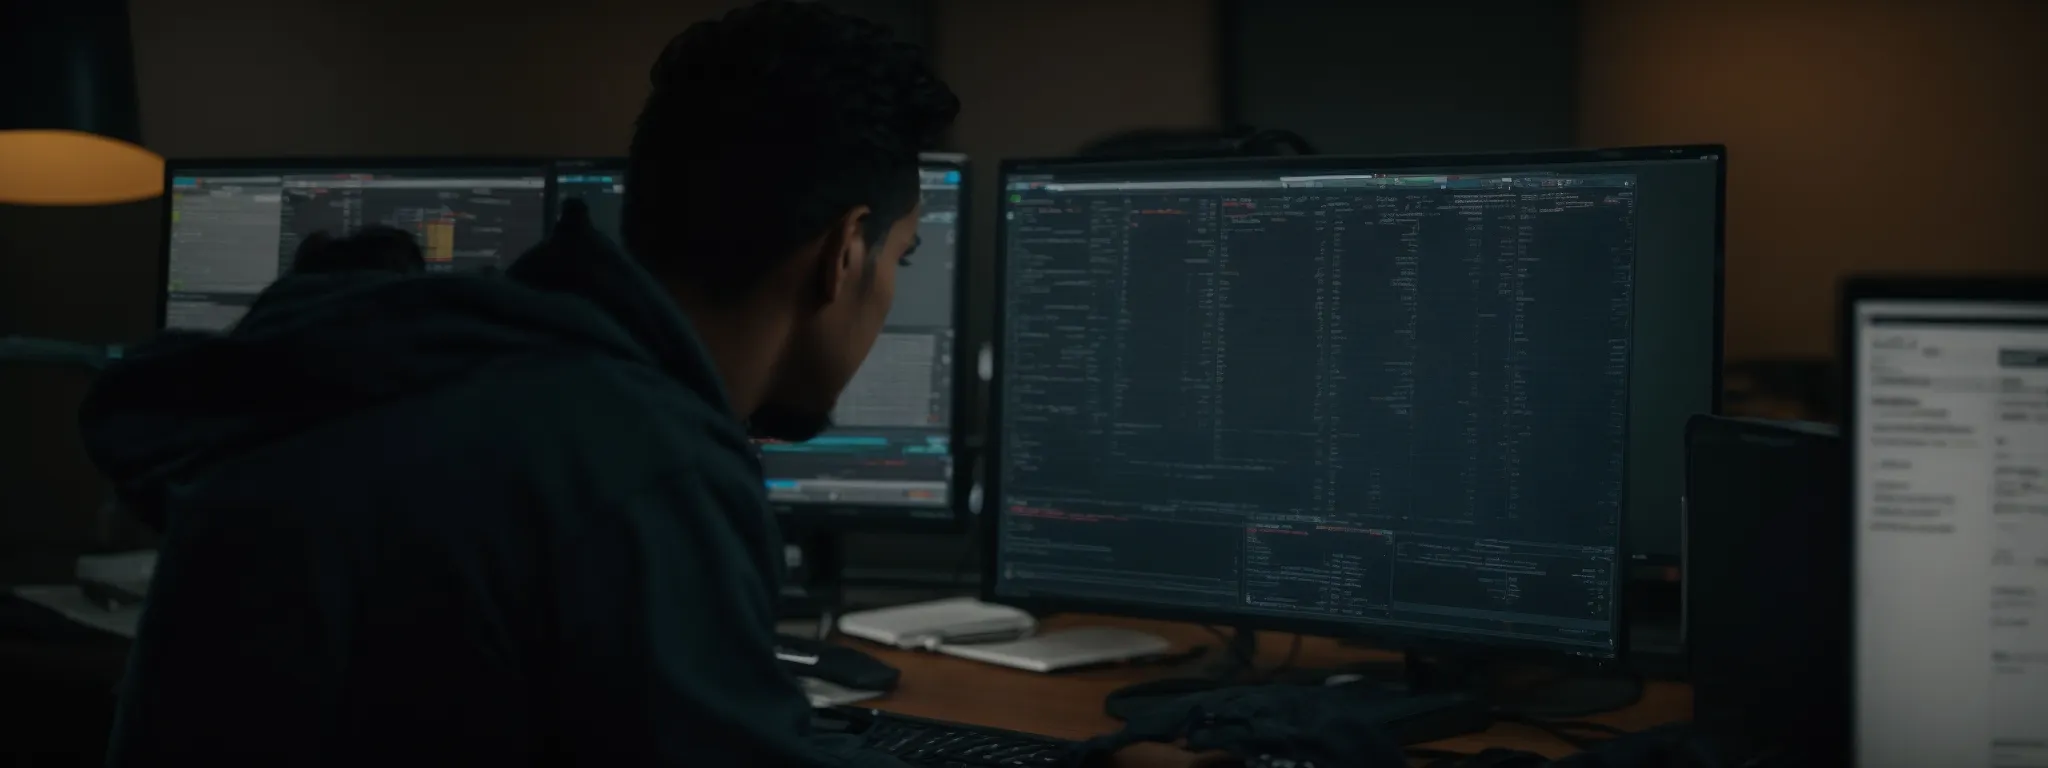 a person sits at a computer, intently examining a screen filled with code and seo analytics.